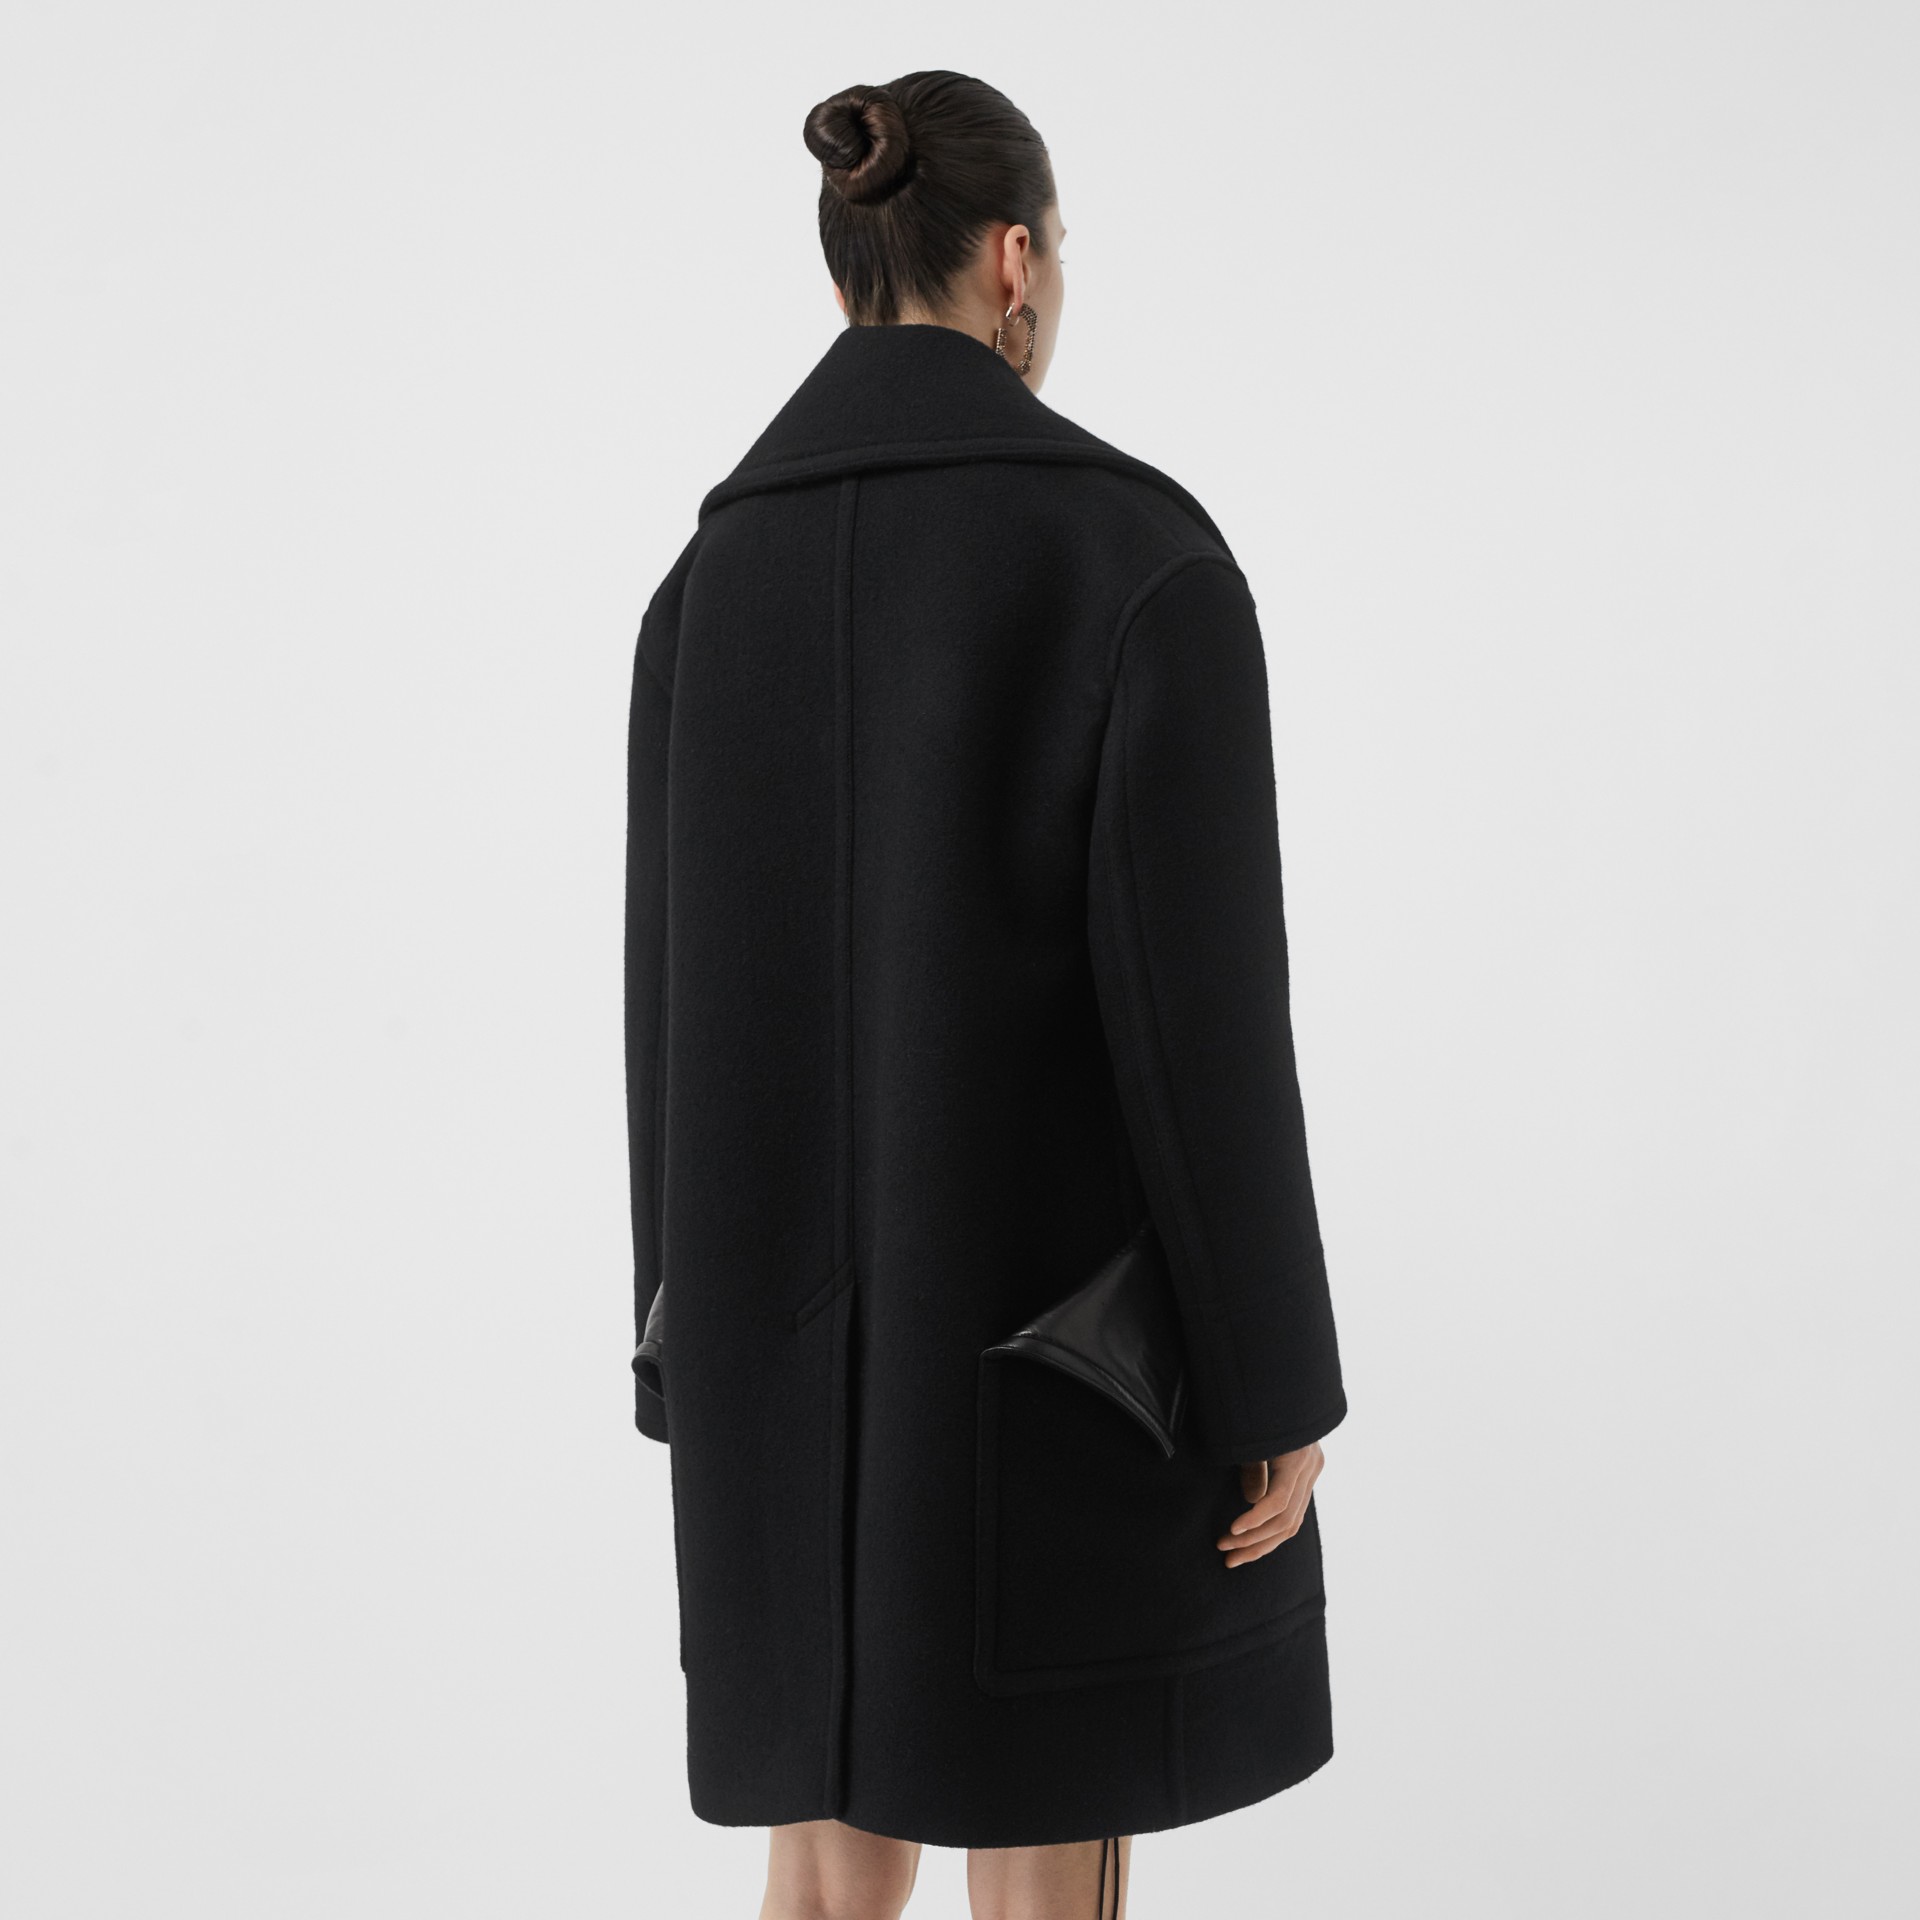 Wool Oversized Pea Coat in Black - Women | Burberry United States